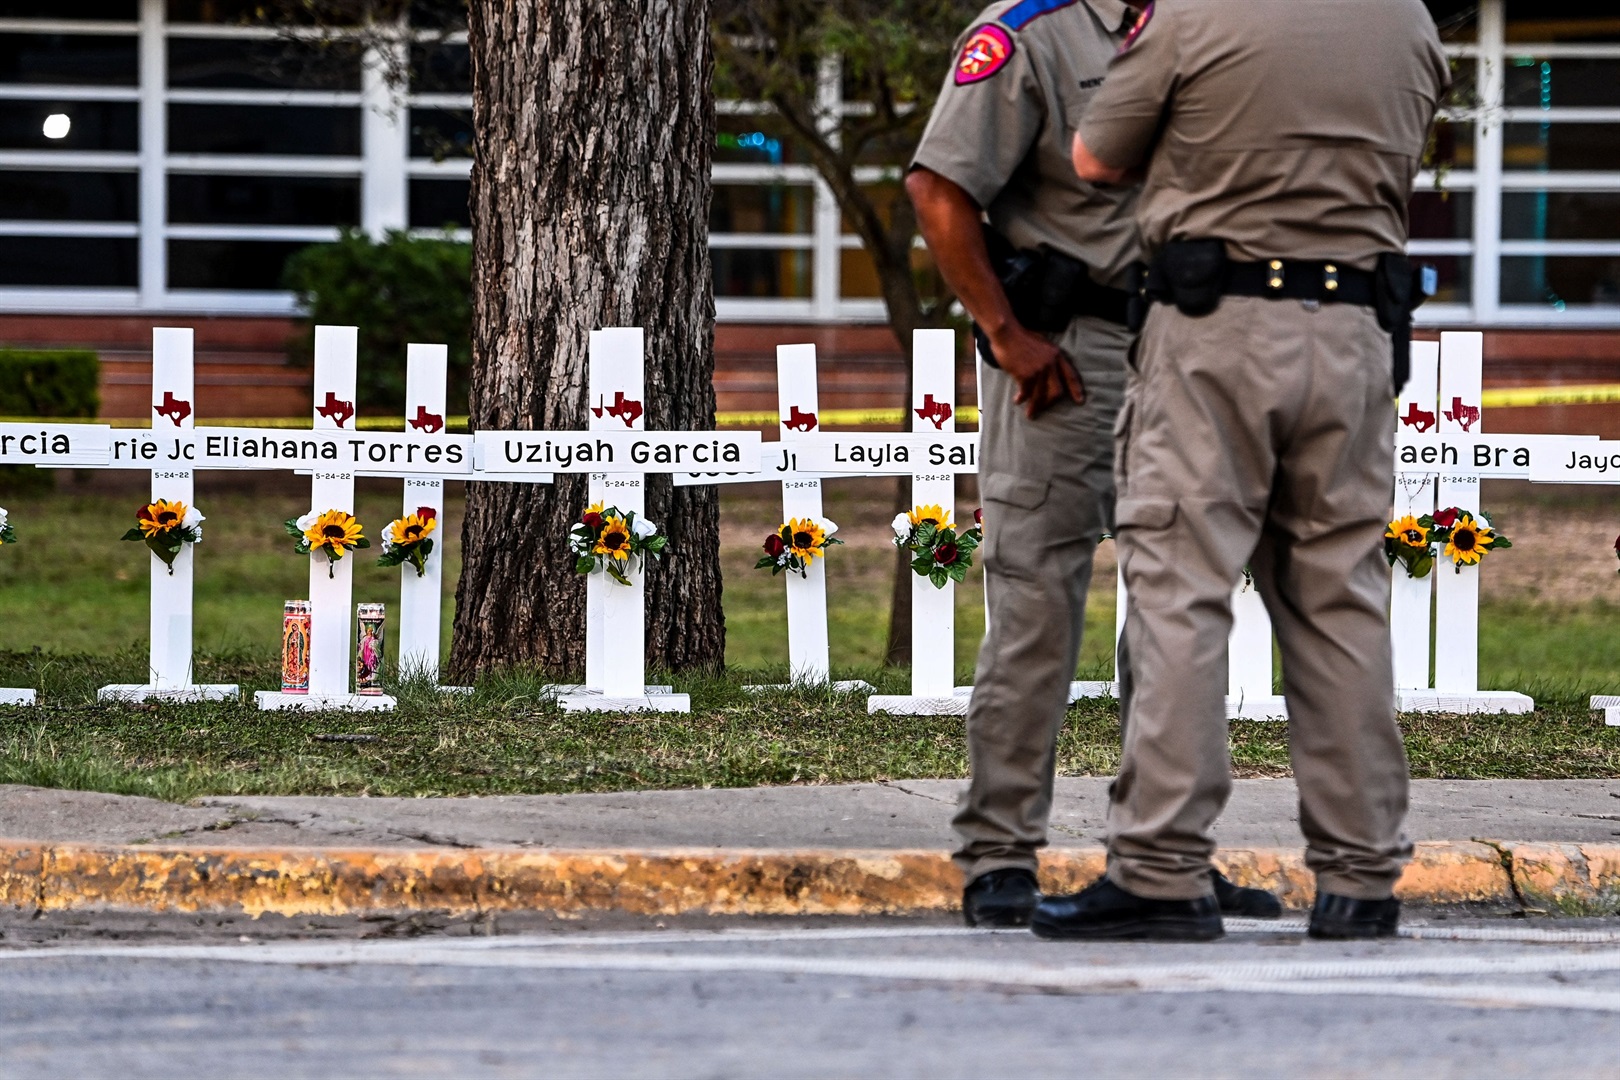 Police officers stand near a makeshift memorial for the shooting victims at Robb Elementary School in Uvalde, Texas, on May 26, 2022.